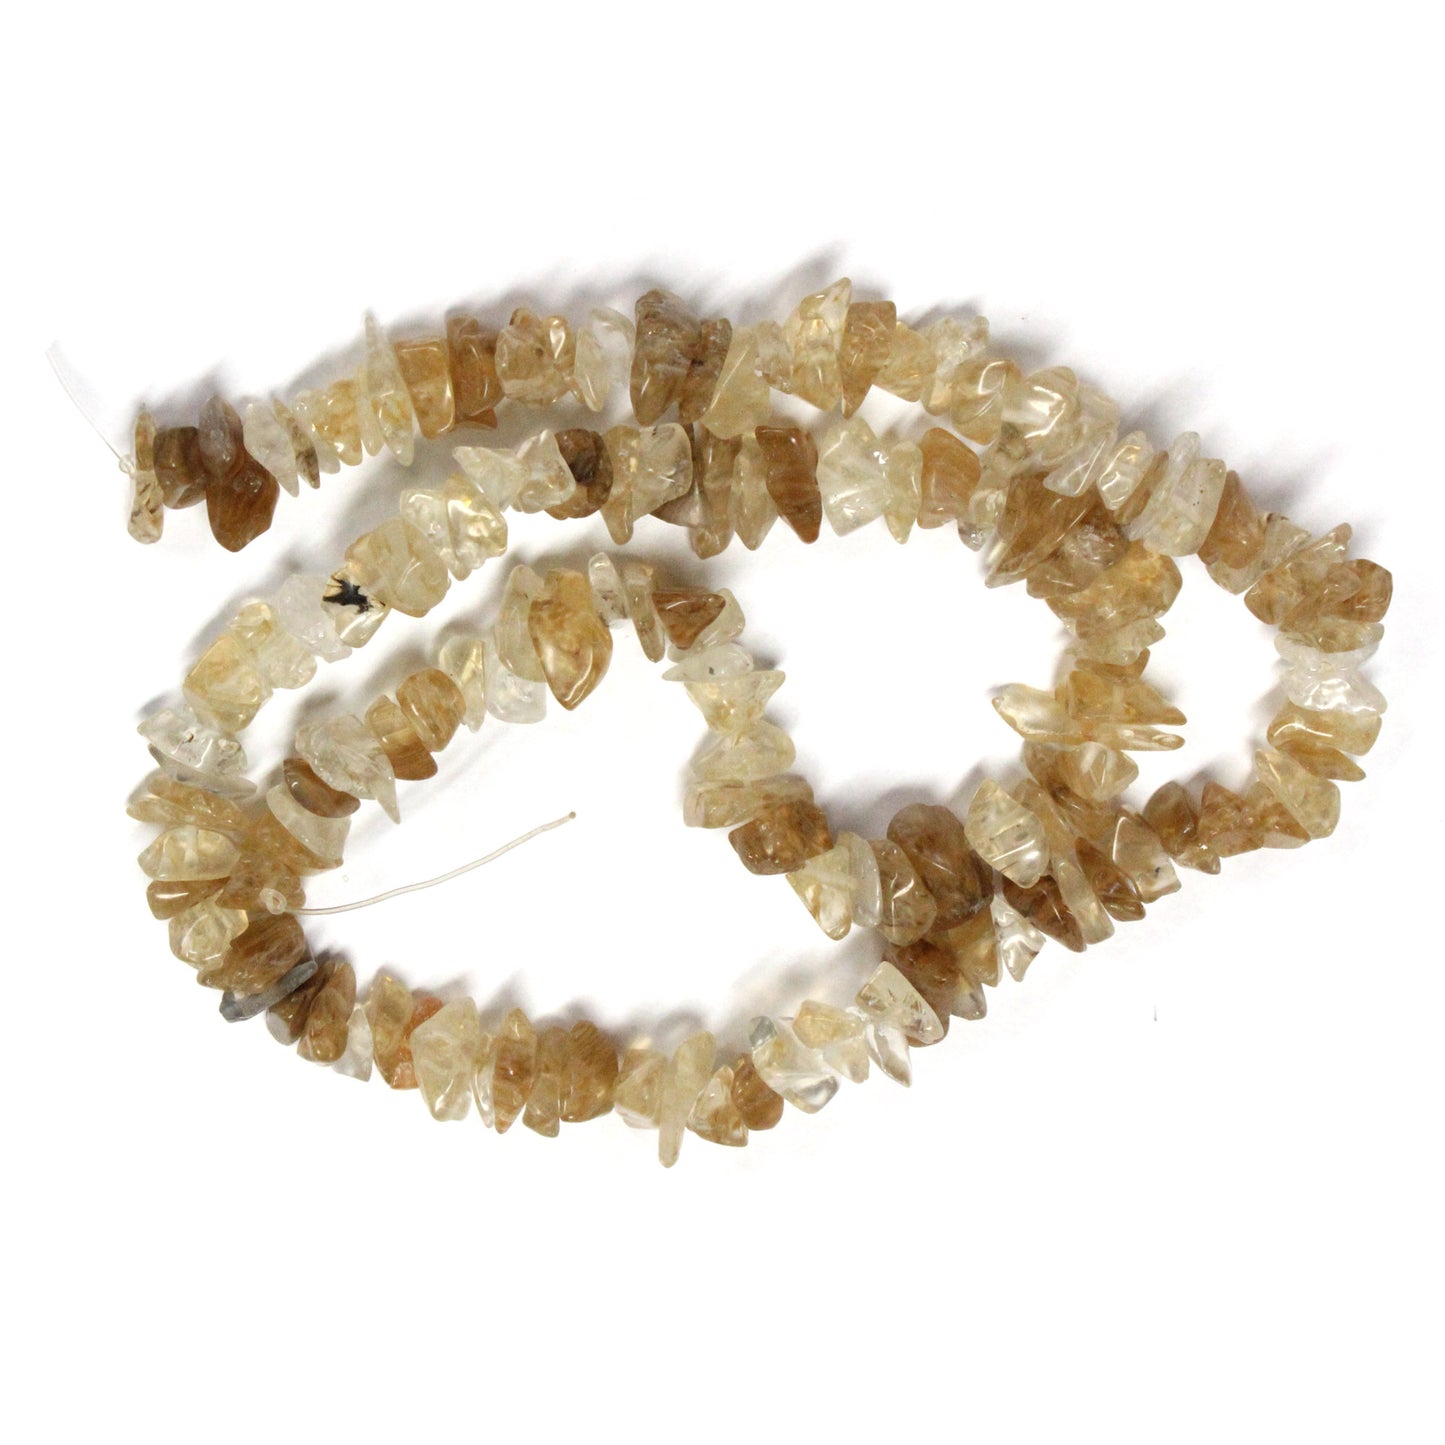 Rutilated Quartz Chip Beads / 16 Inch strand / 6-10mm chips / natural translucent stone